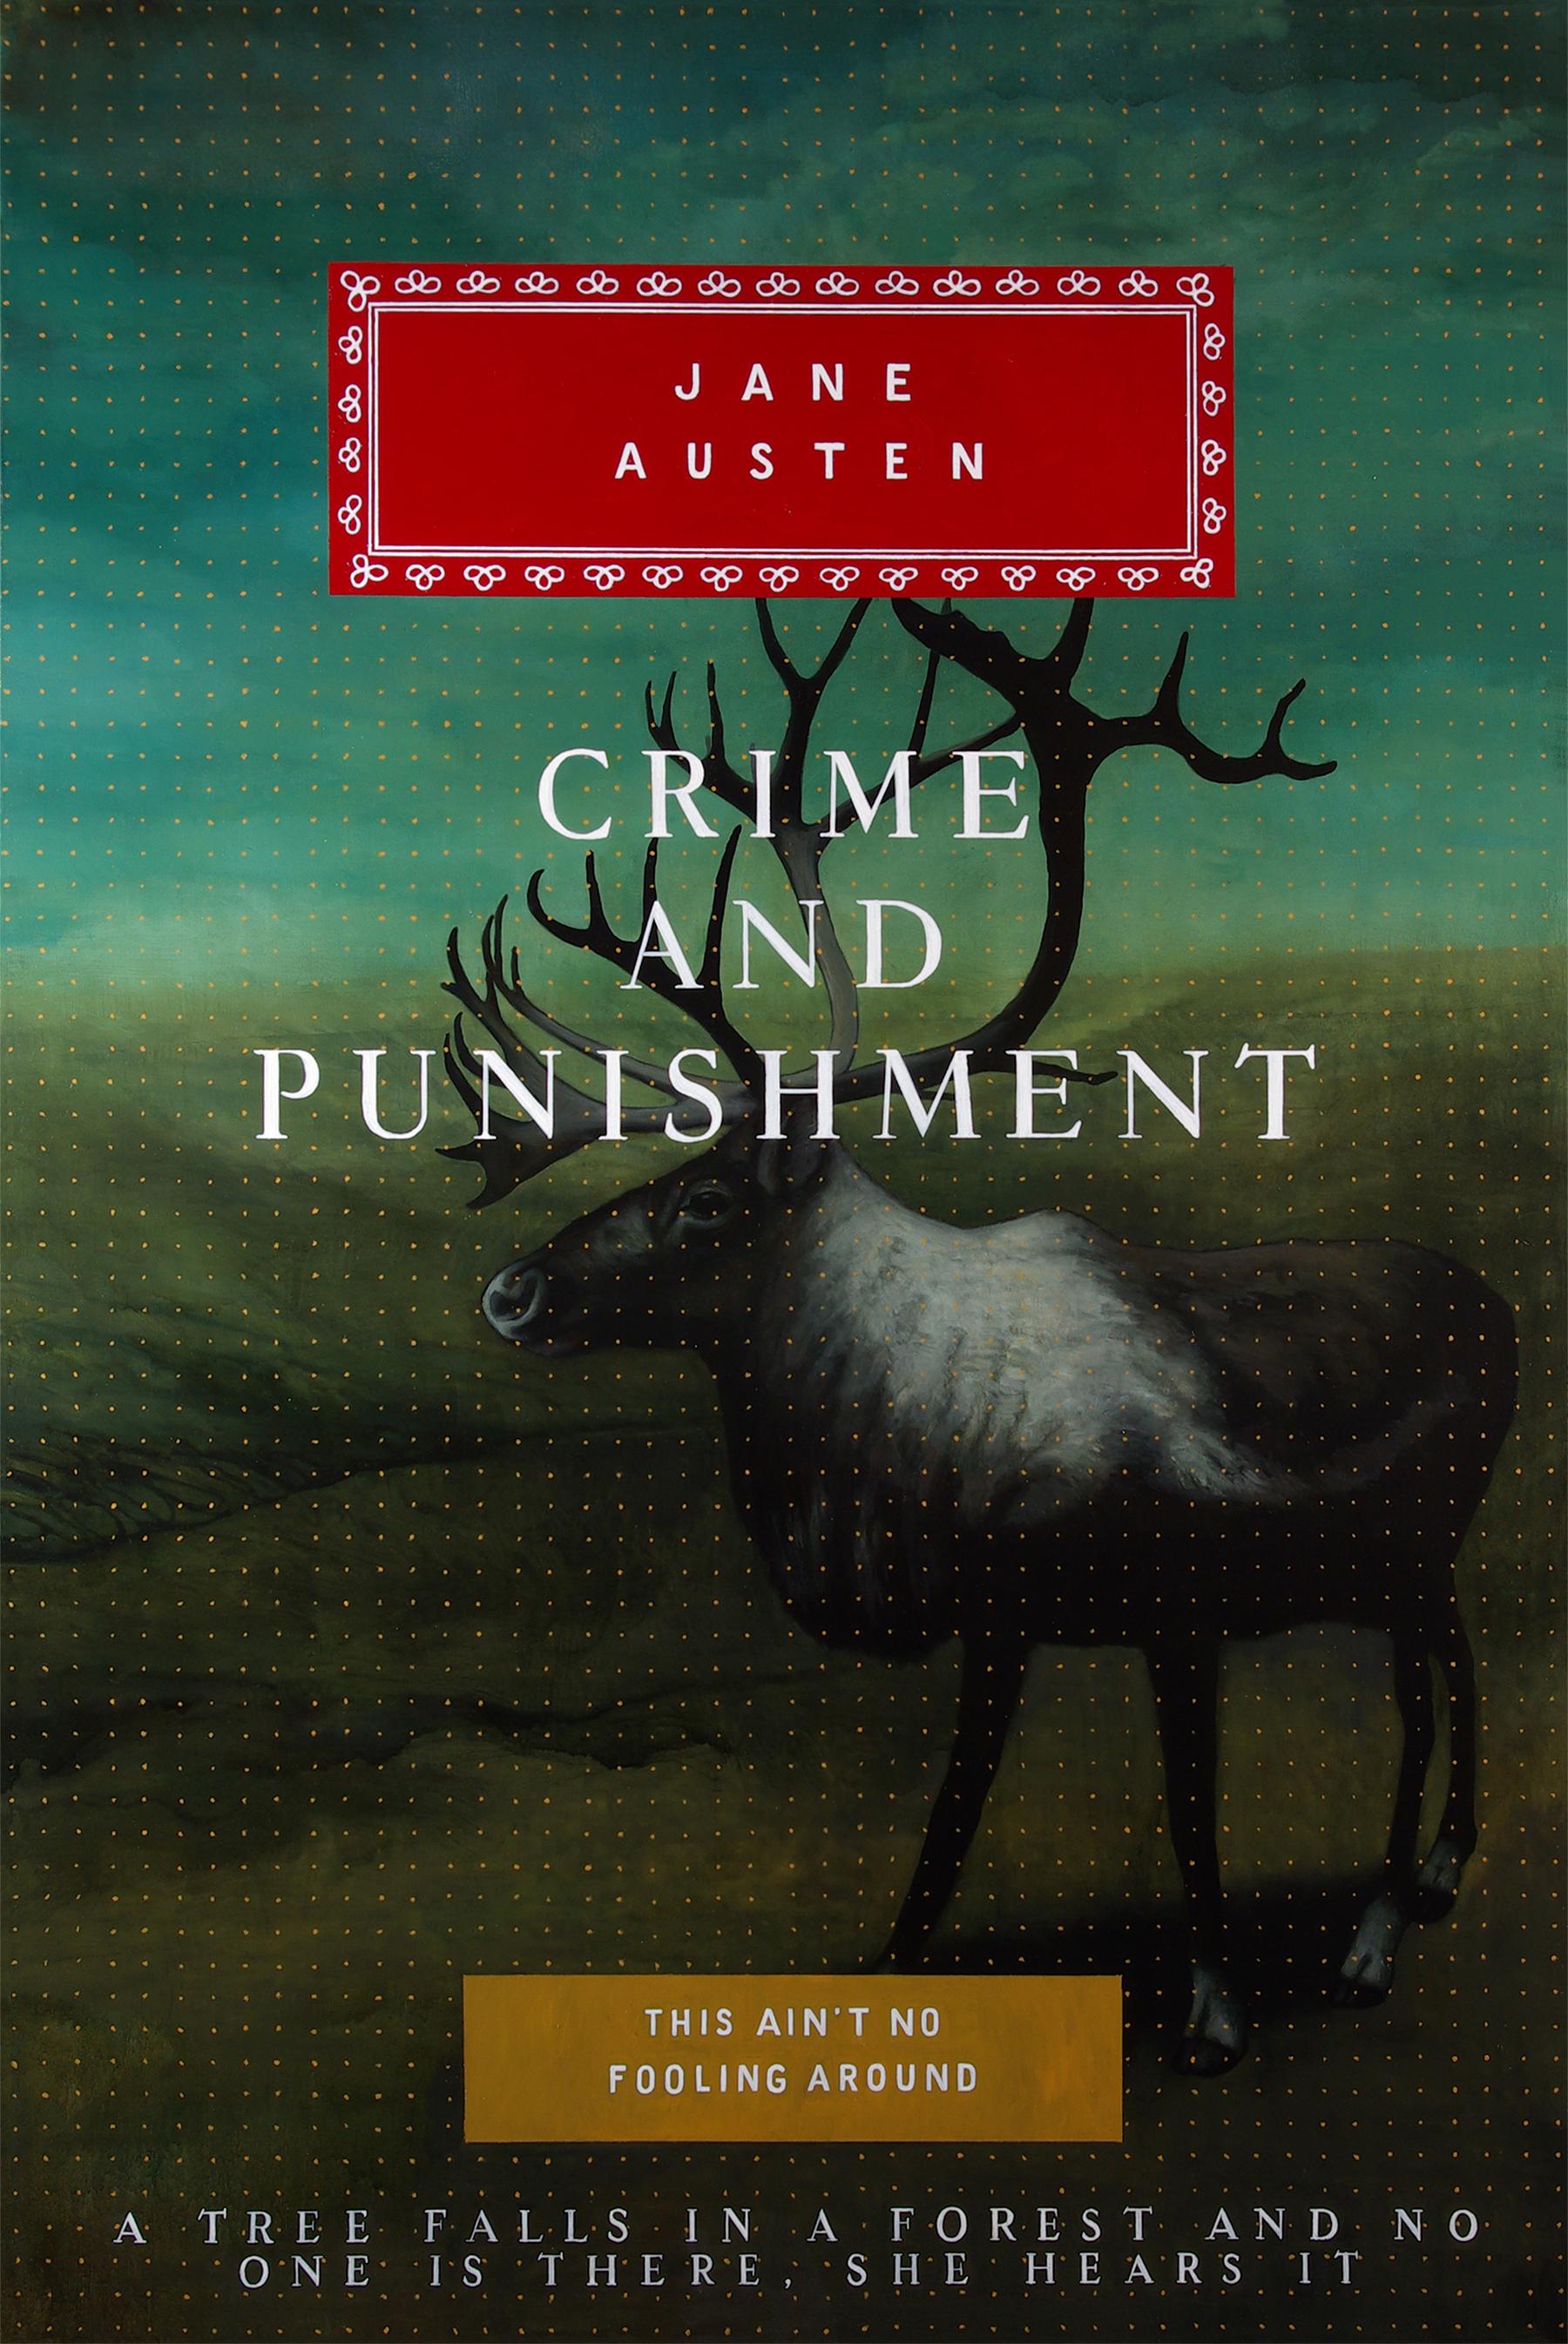 Don Pollack Animal Painting - Crime and Punishment - Original Oil Painting of Fictional Oversized Book Cover